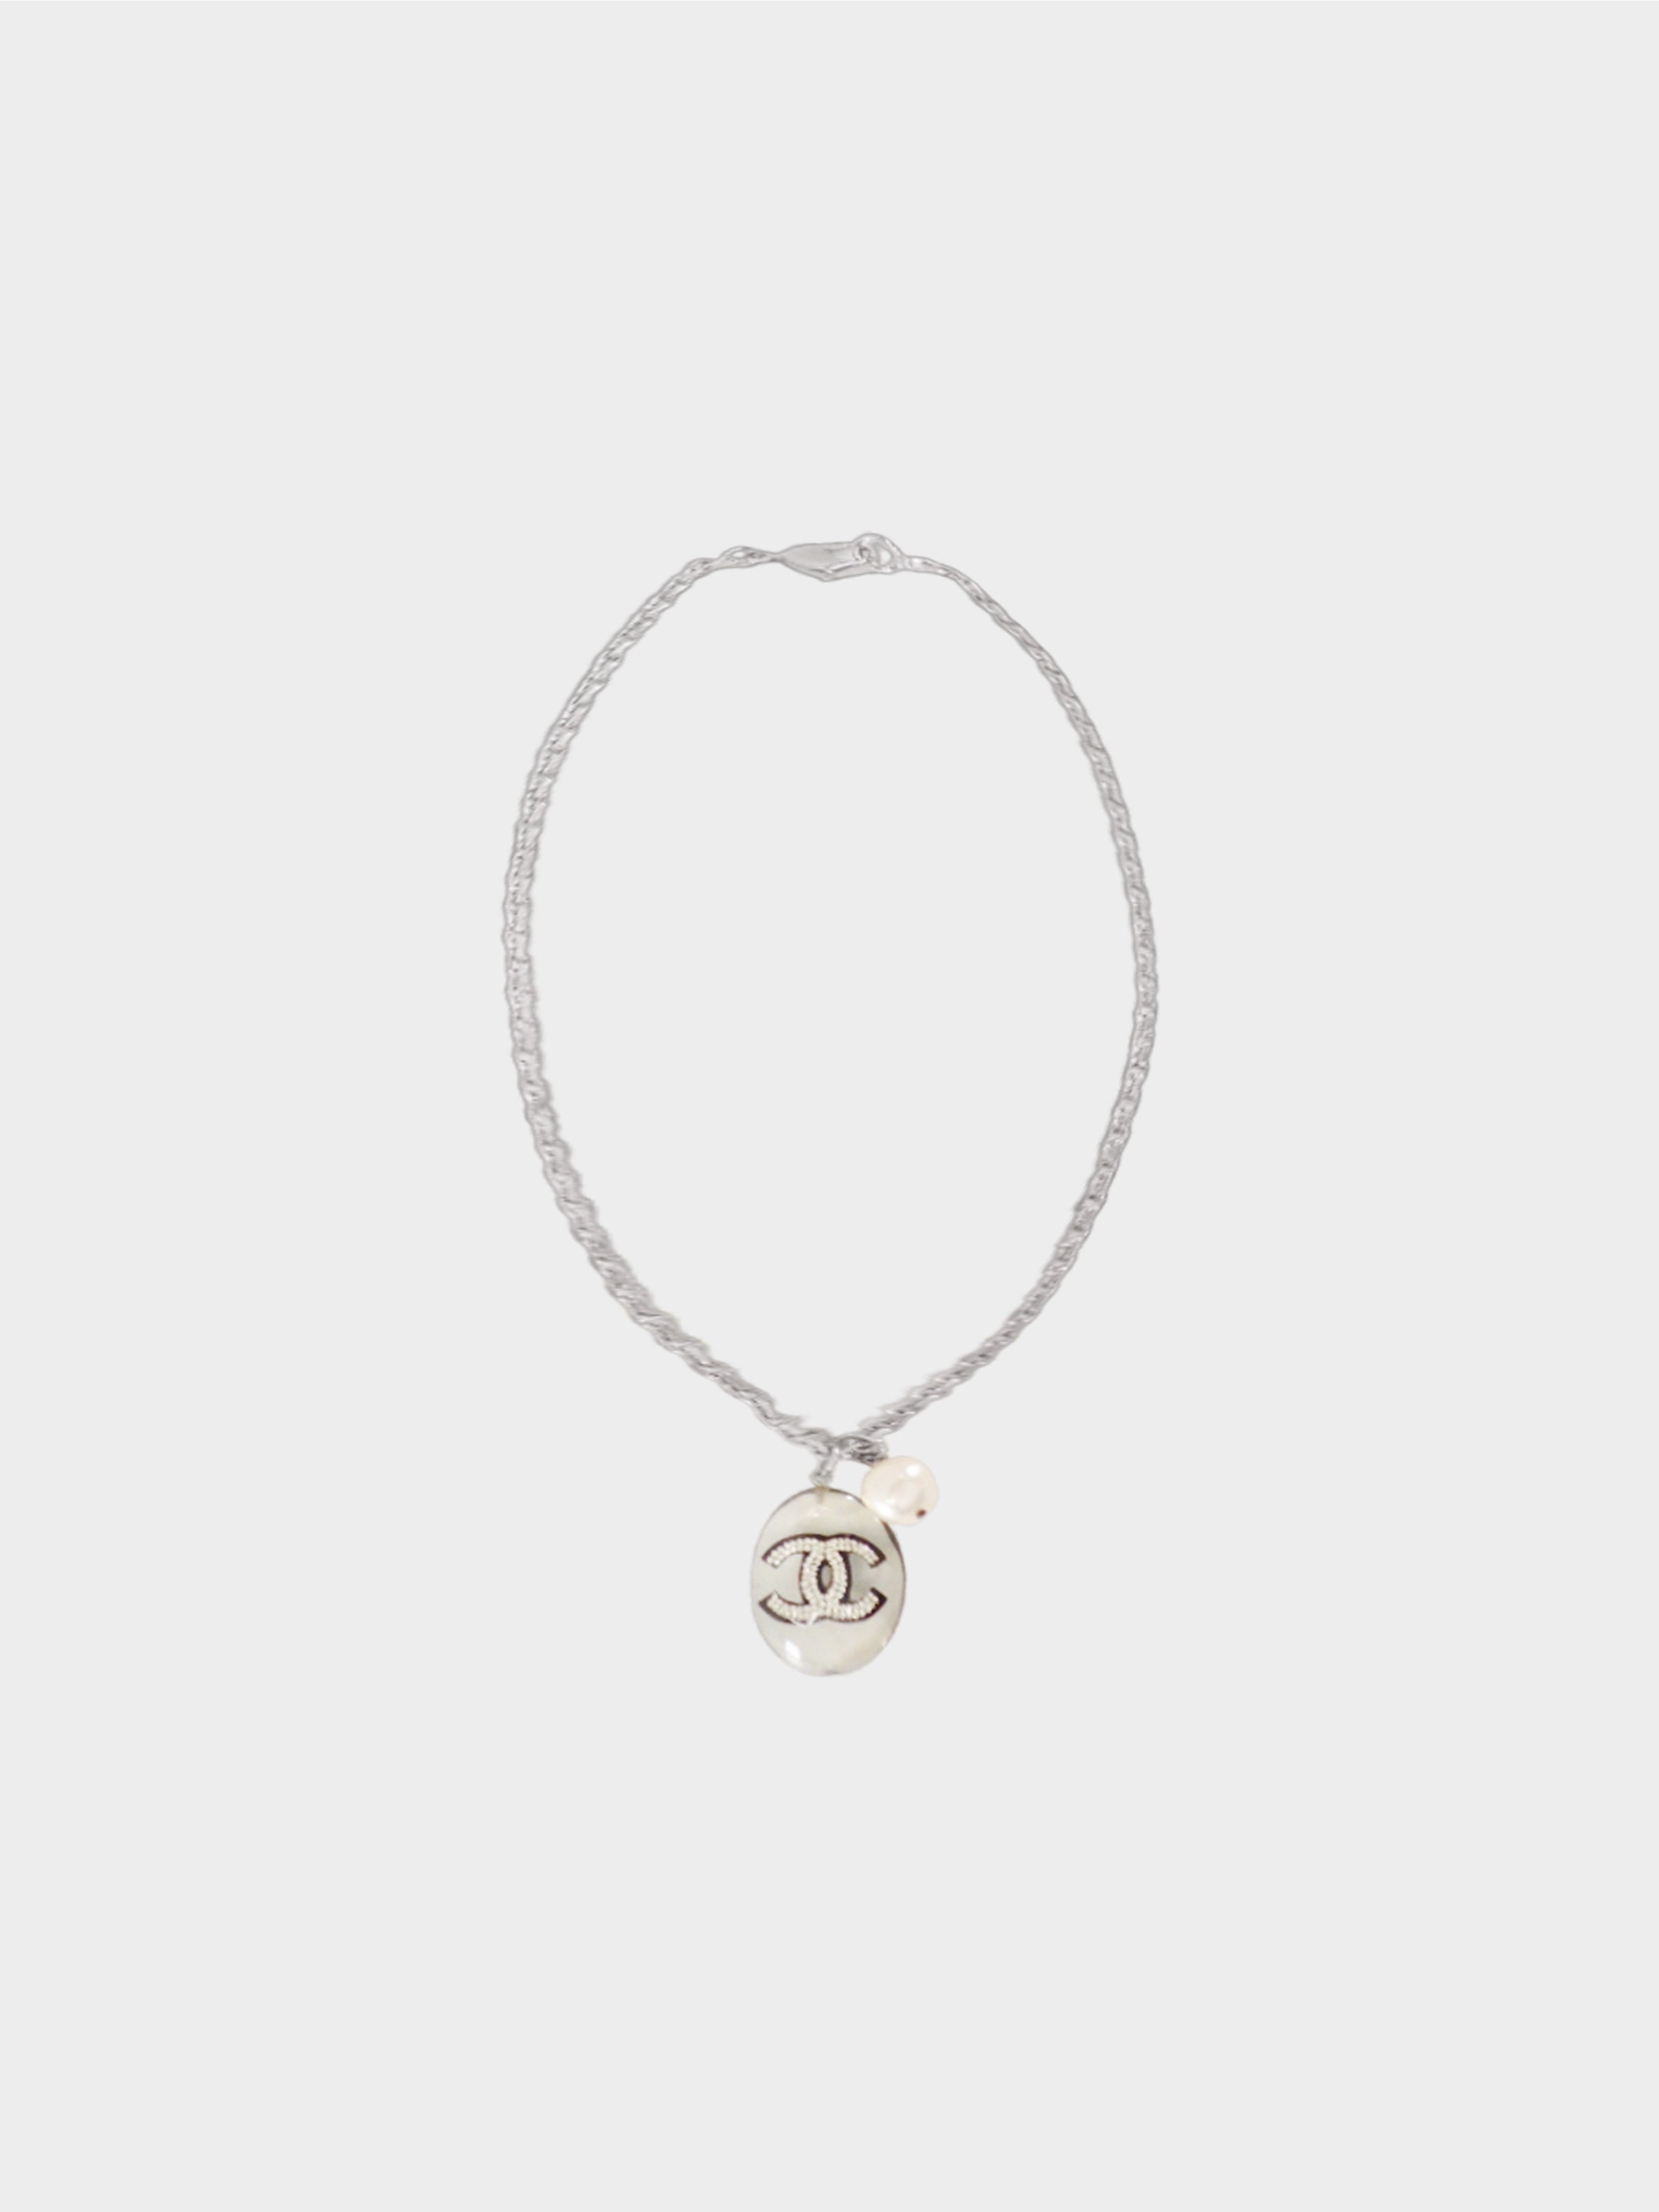 Chanel Fall 2004 Clear Oval CC Resin and Faux Pearl Pendant Necklace